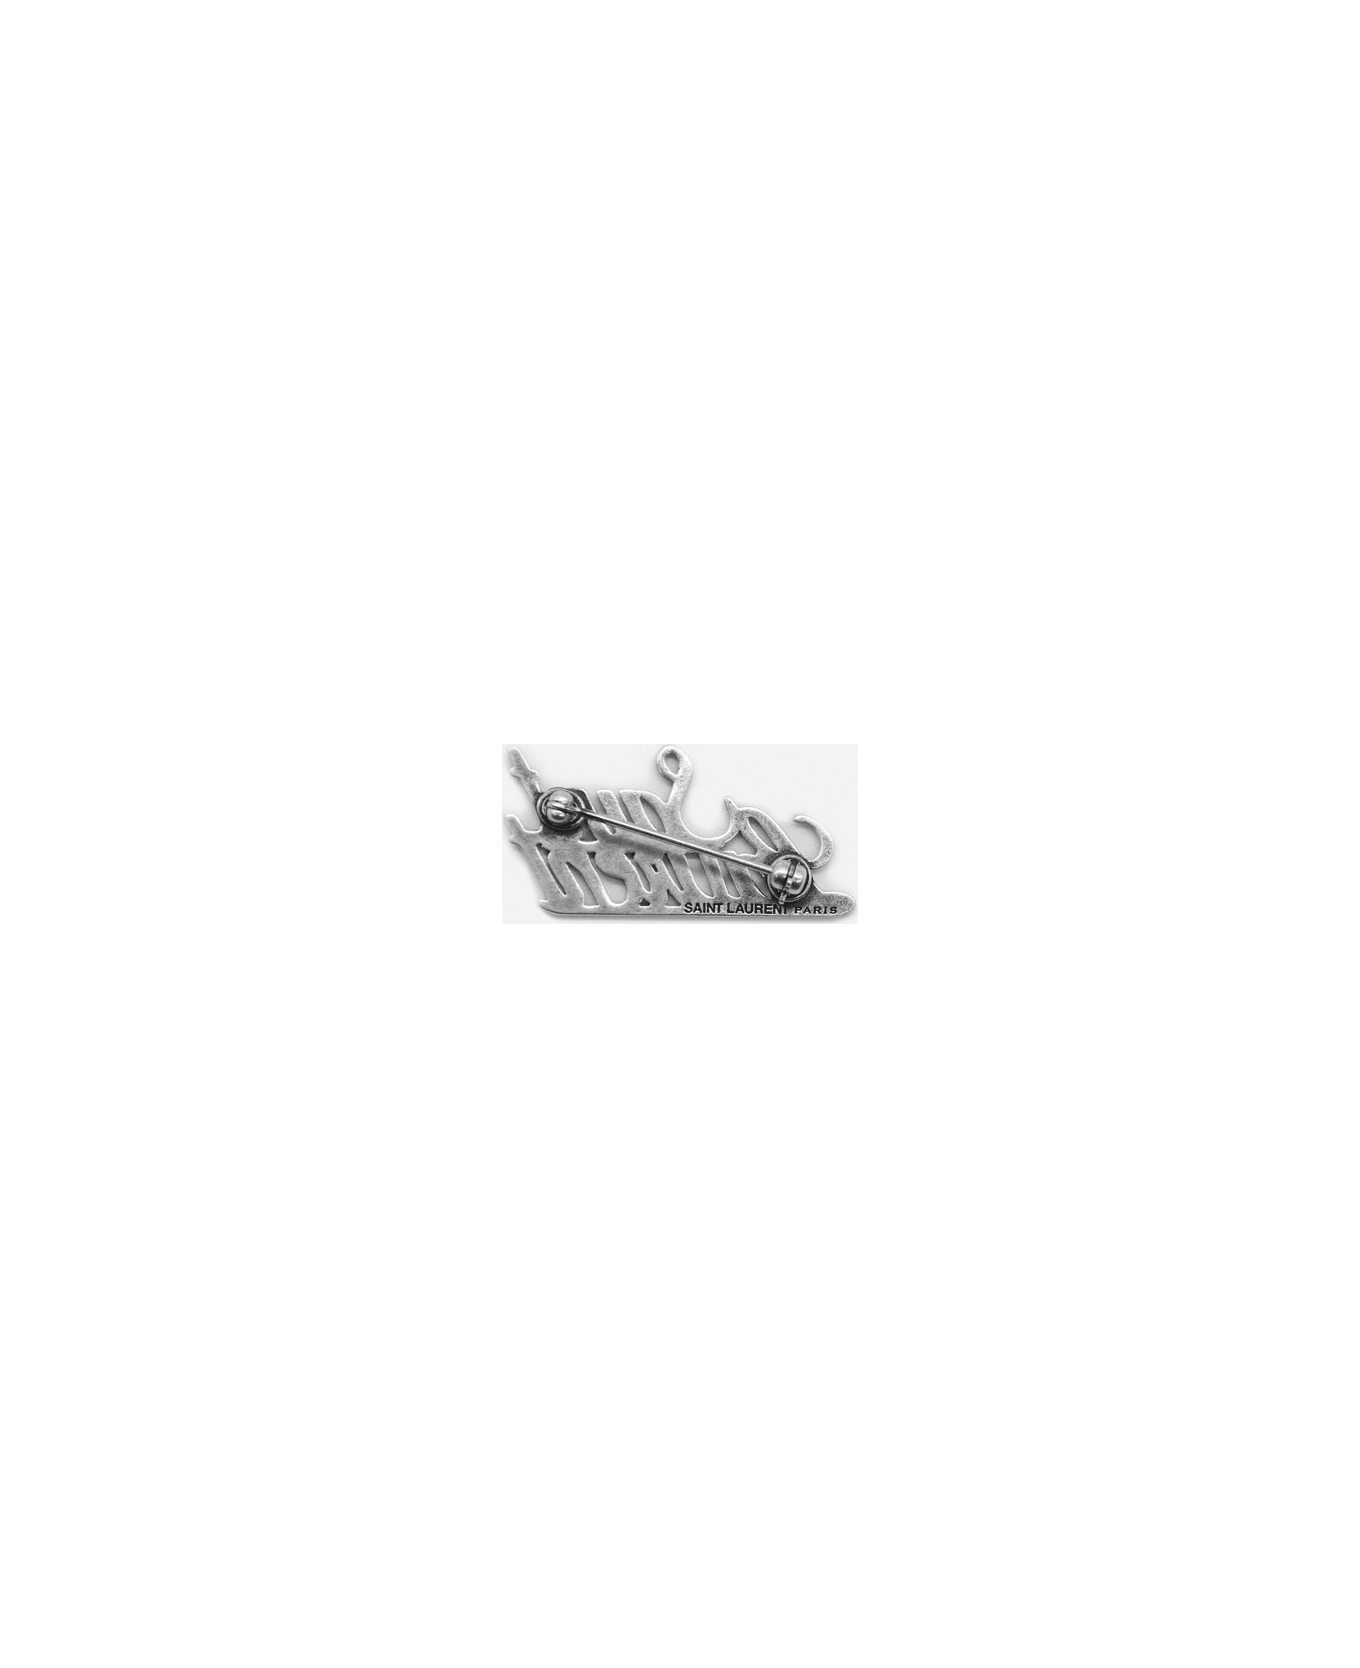 Saint Laurent Brass Brooch With Logo Lettering - Silver